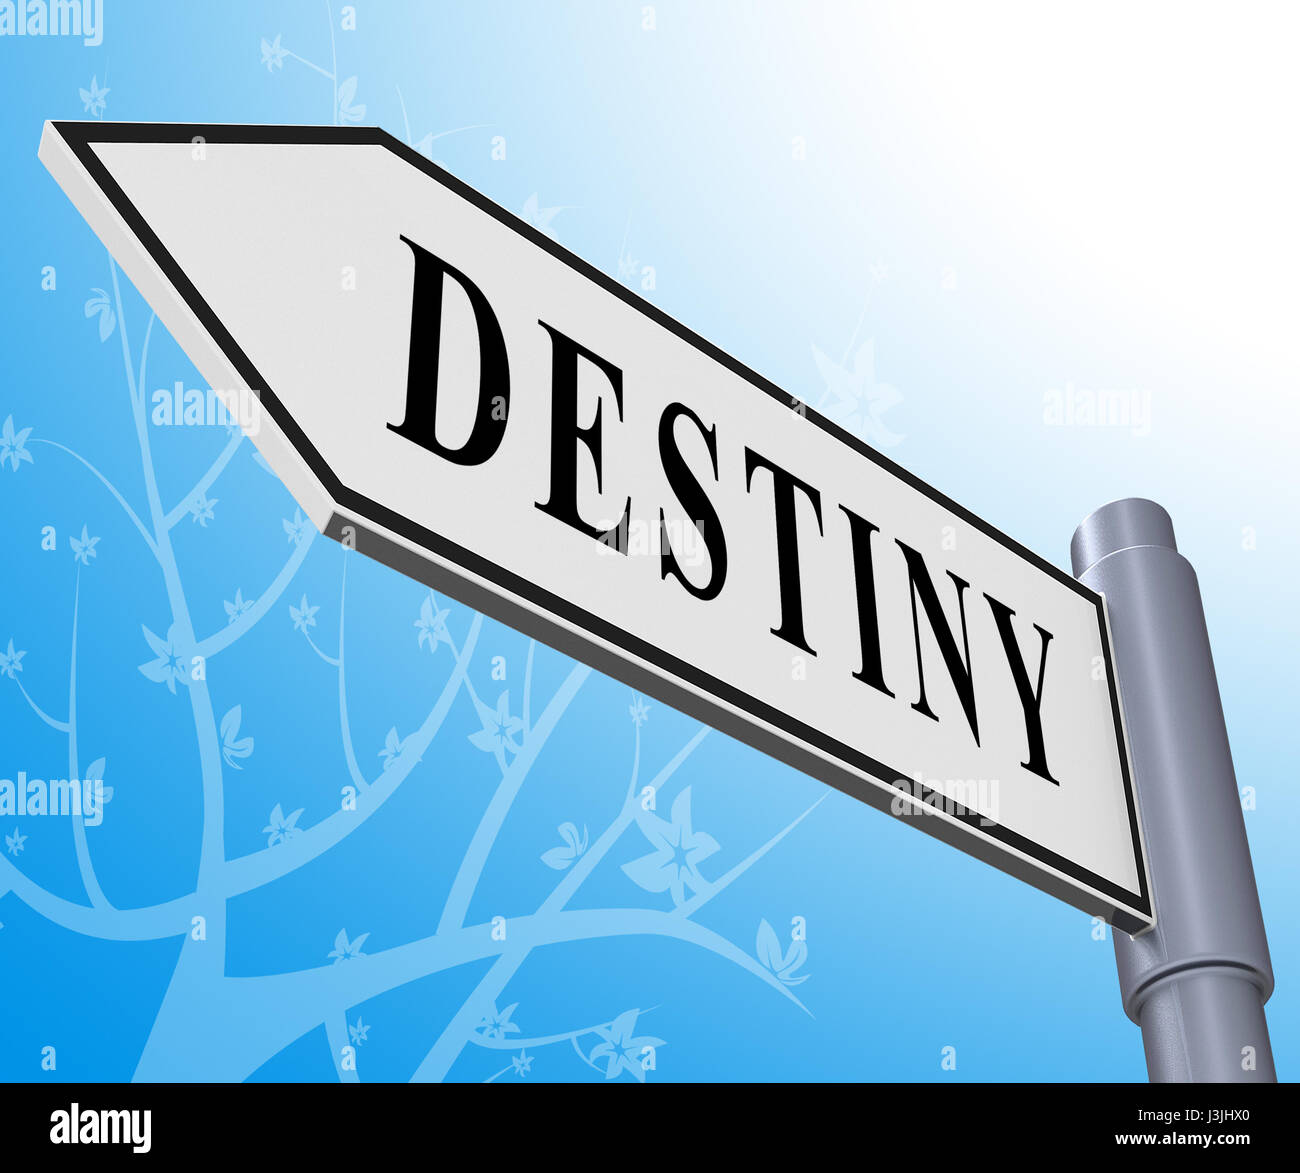 Destiny Road Sign Meaning Progress And Future 3d Illustration Stock Photo